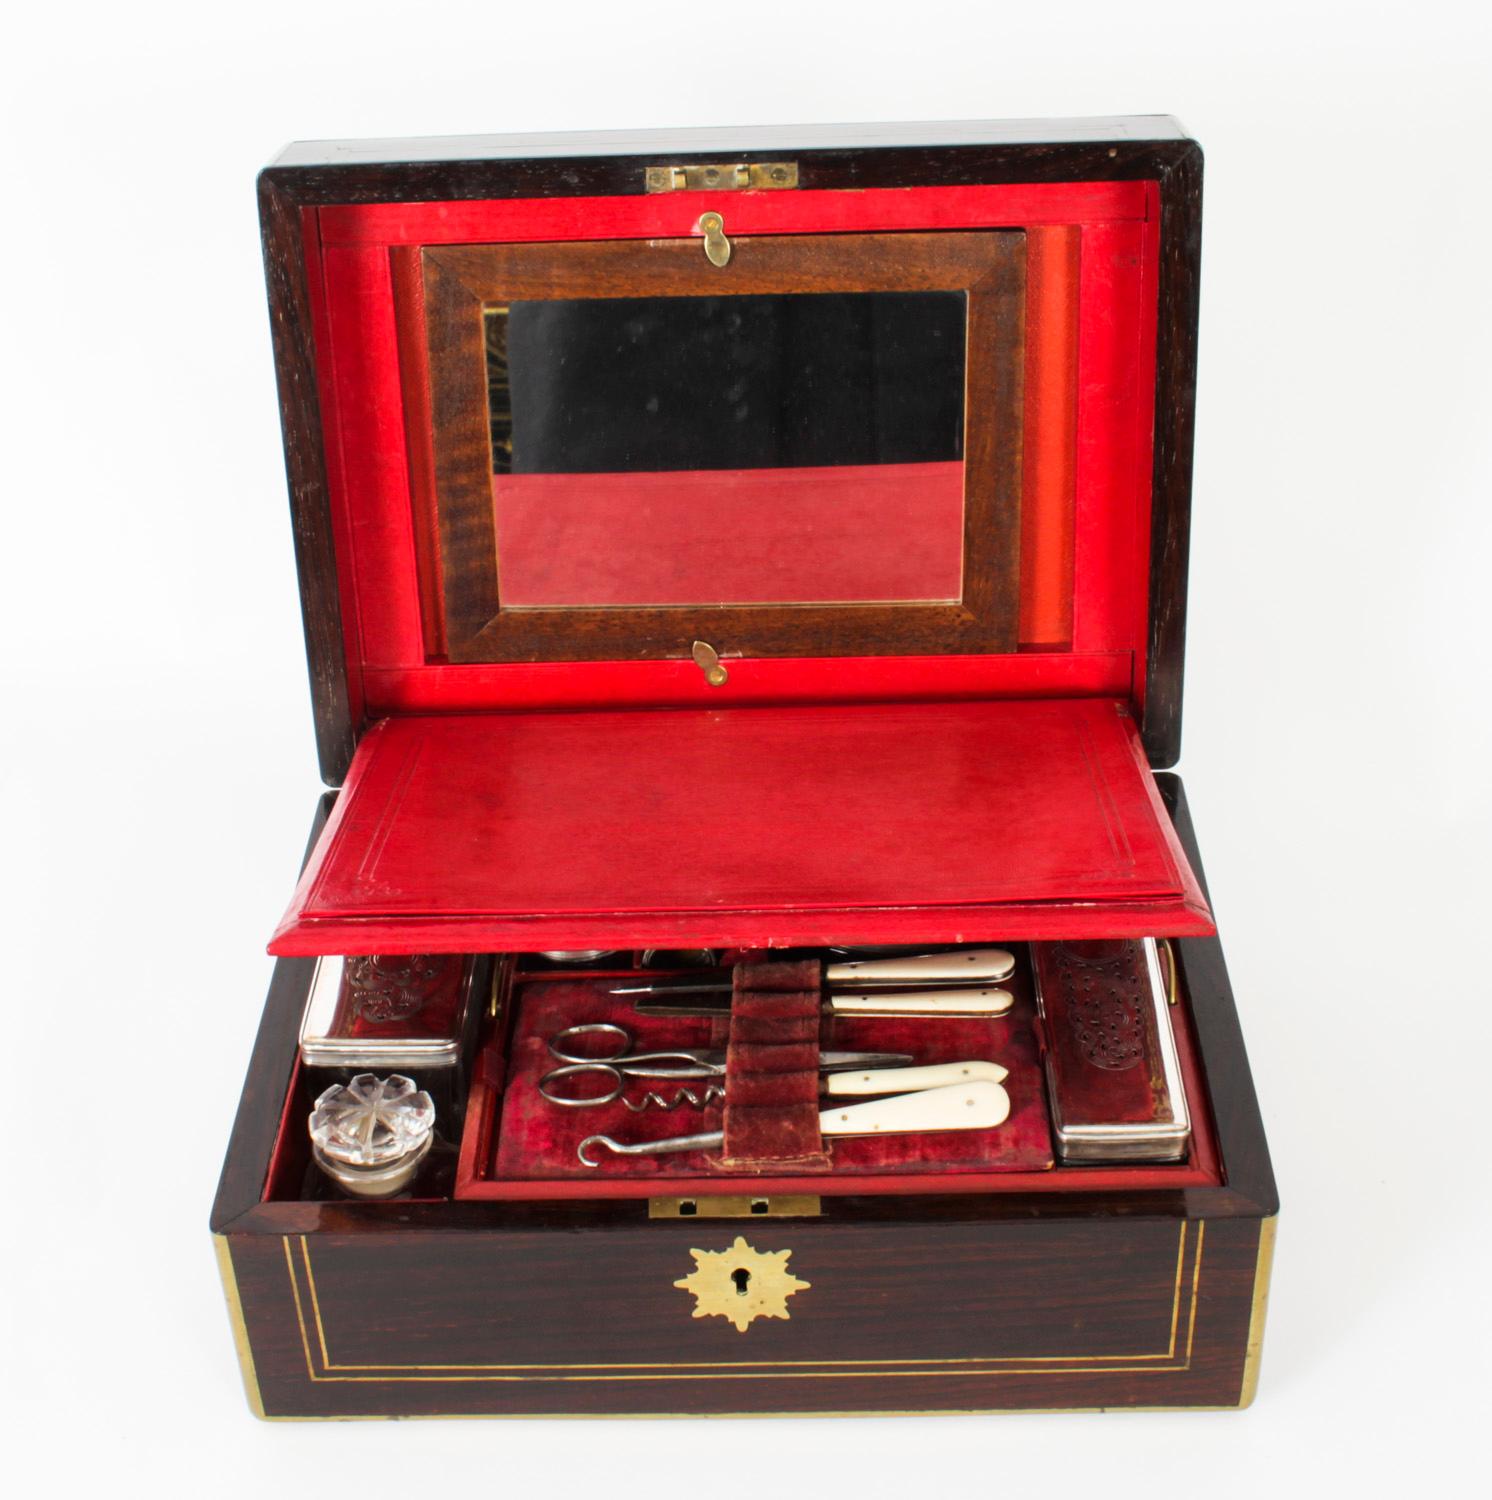 This is a stunning antique Victorian gentlemen's coromandel travelling case, circa 1840 in date.

This traveling case features a hinged cover with brass stringing and a shaped plaque. The inside of the lid has a hidden correspondence folder in red